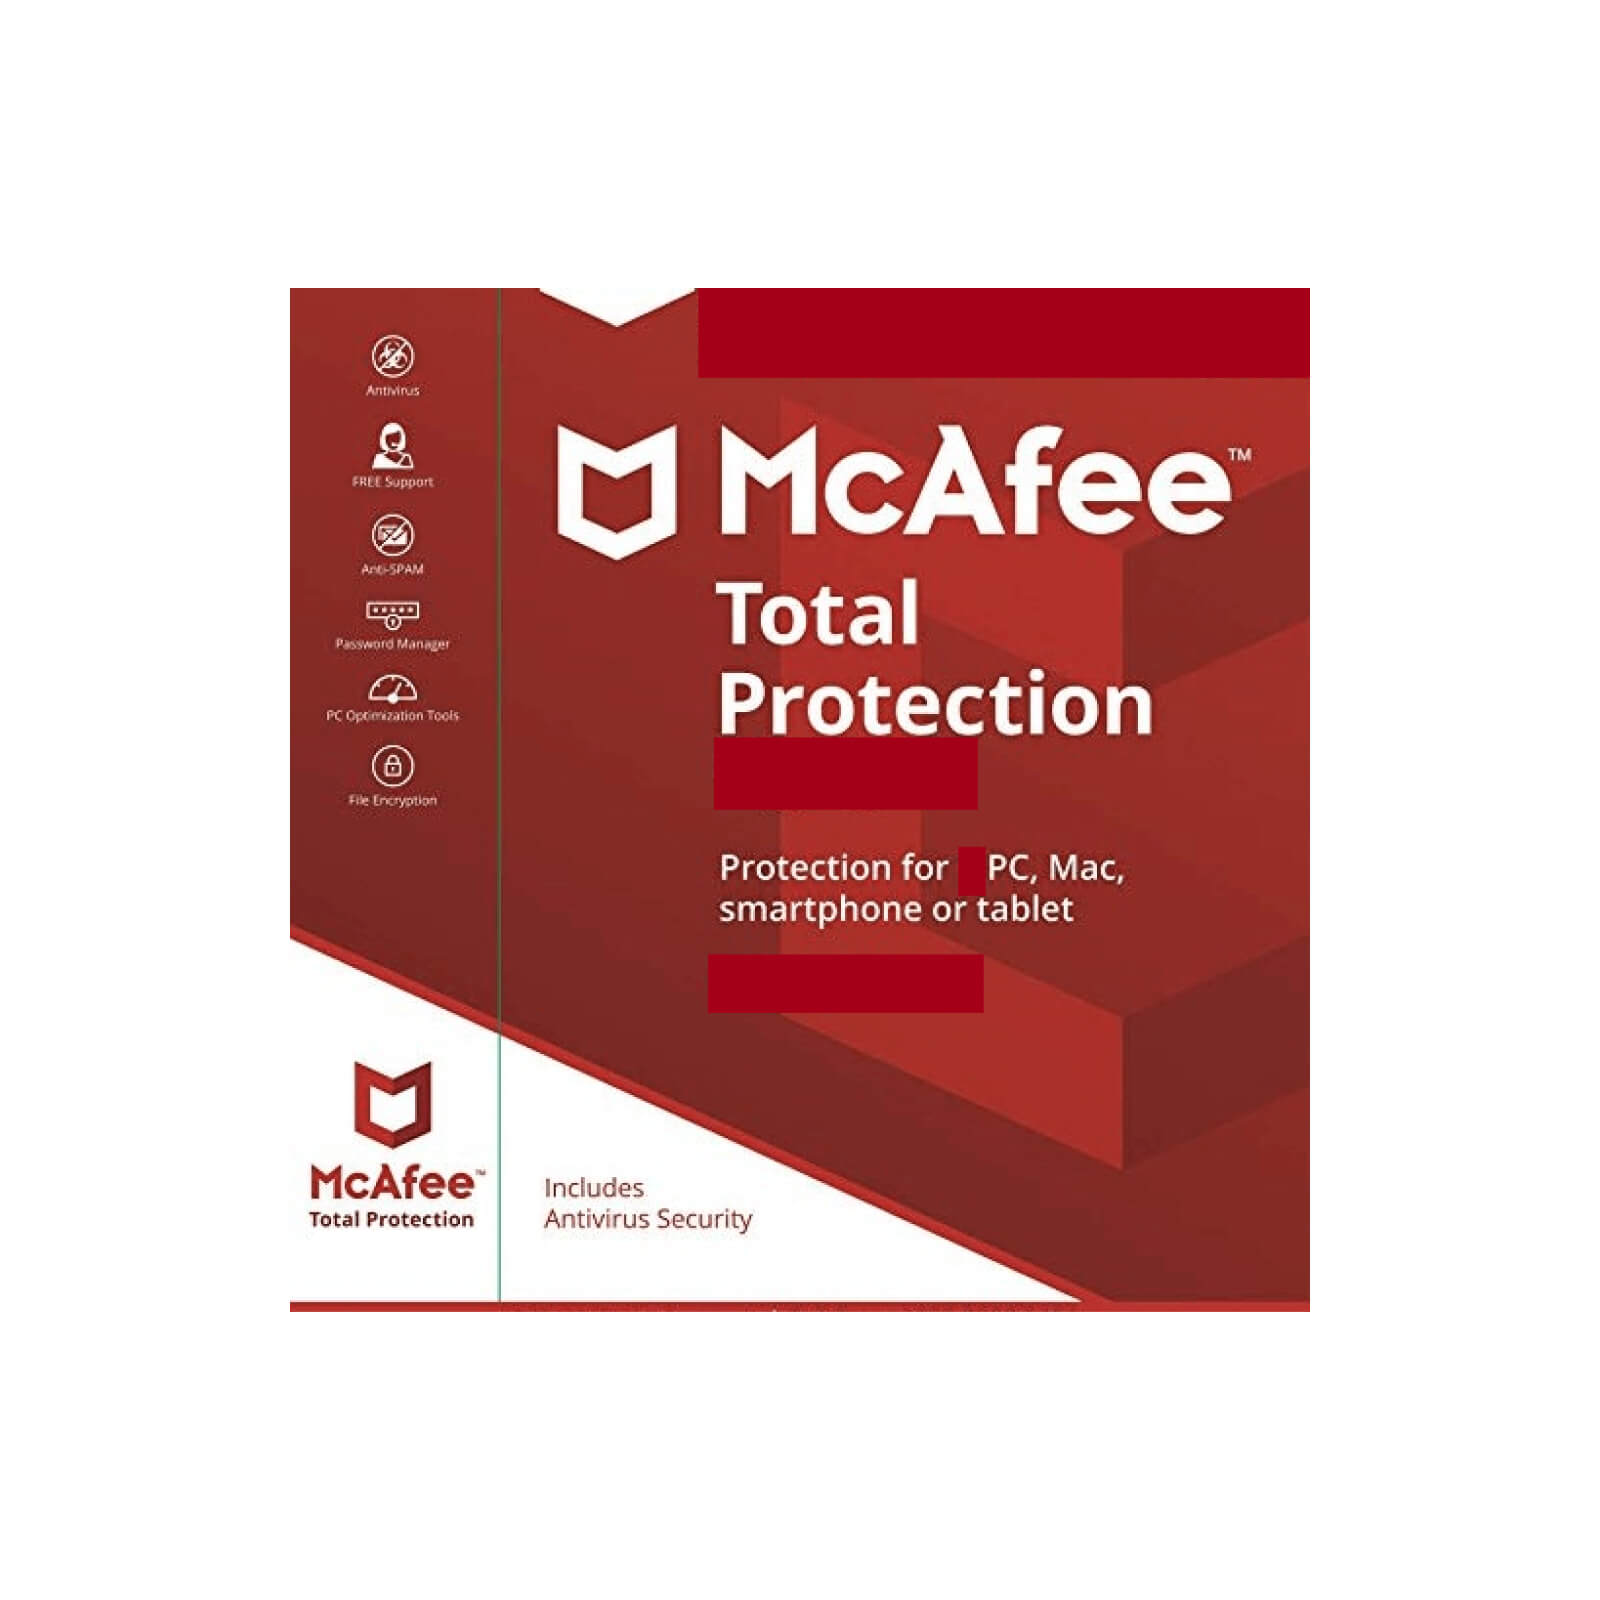 mcafee total protection 2018 review